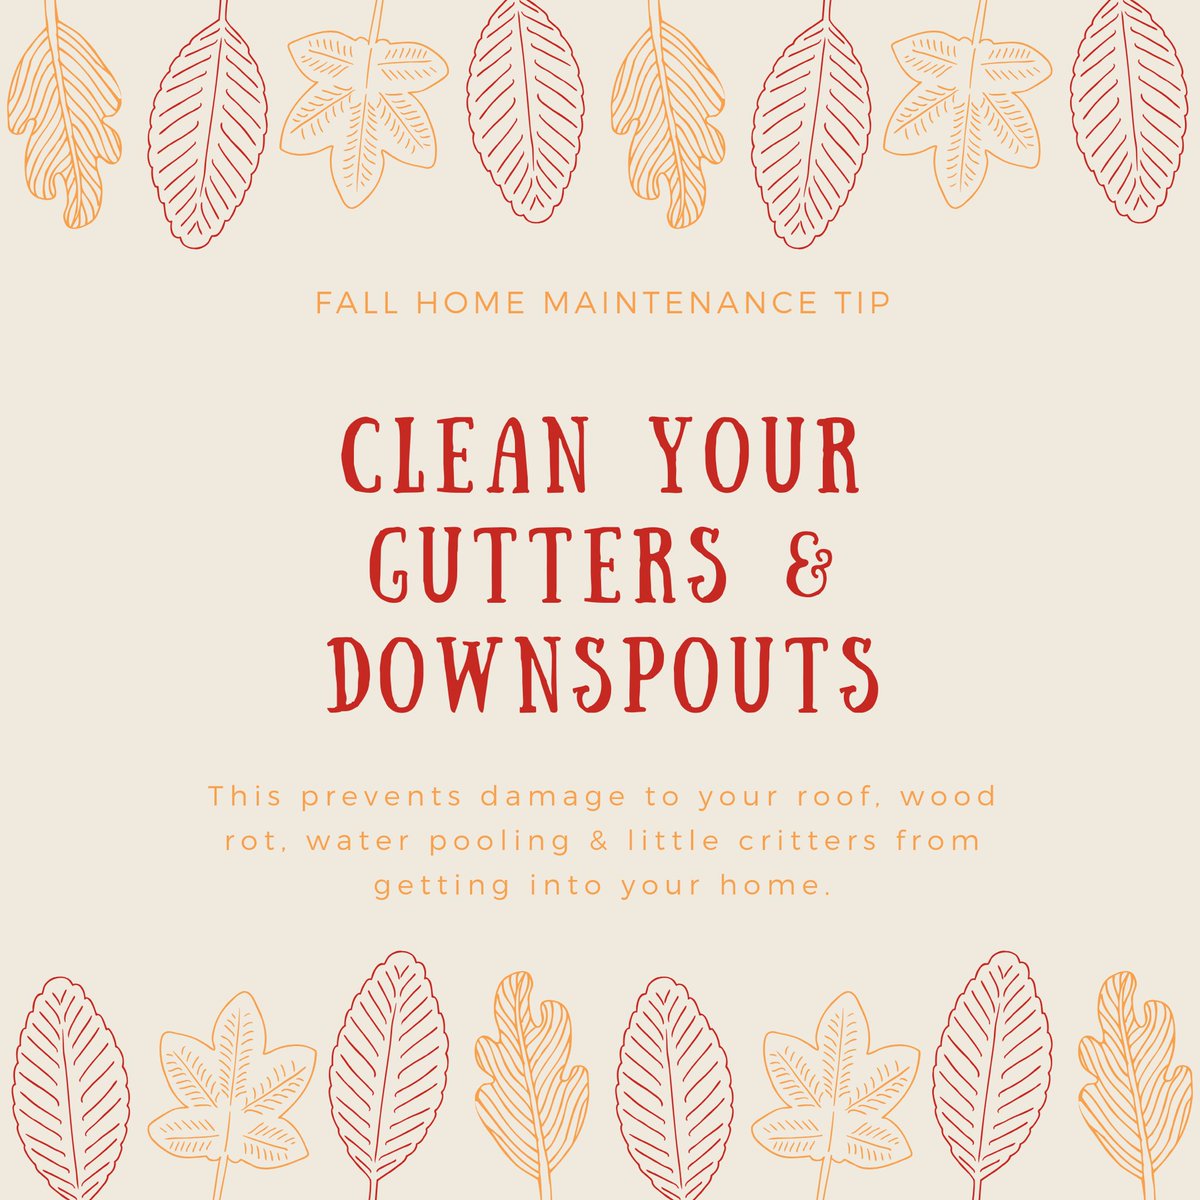 Fall is just around the corner ... keep in mind that your home may need a little TLC before the weather changes! 🍃🍁🍂
•
•
•
•
•
#quinnkc #quinnrealestate #quinnrealestateco #quinndevelopment  #kansashomes #kansasrealestate #fallhome #fallhometips #homemaintenance